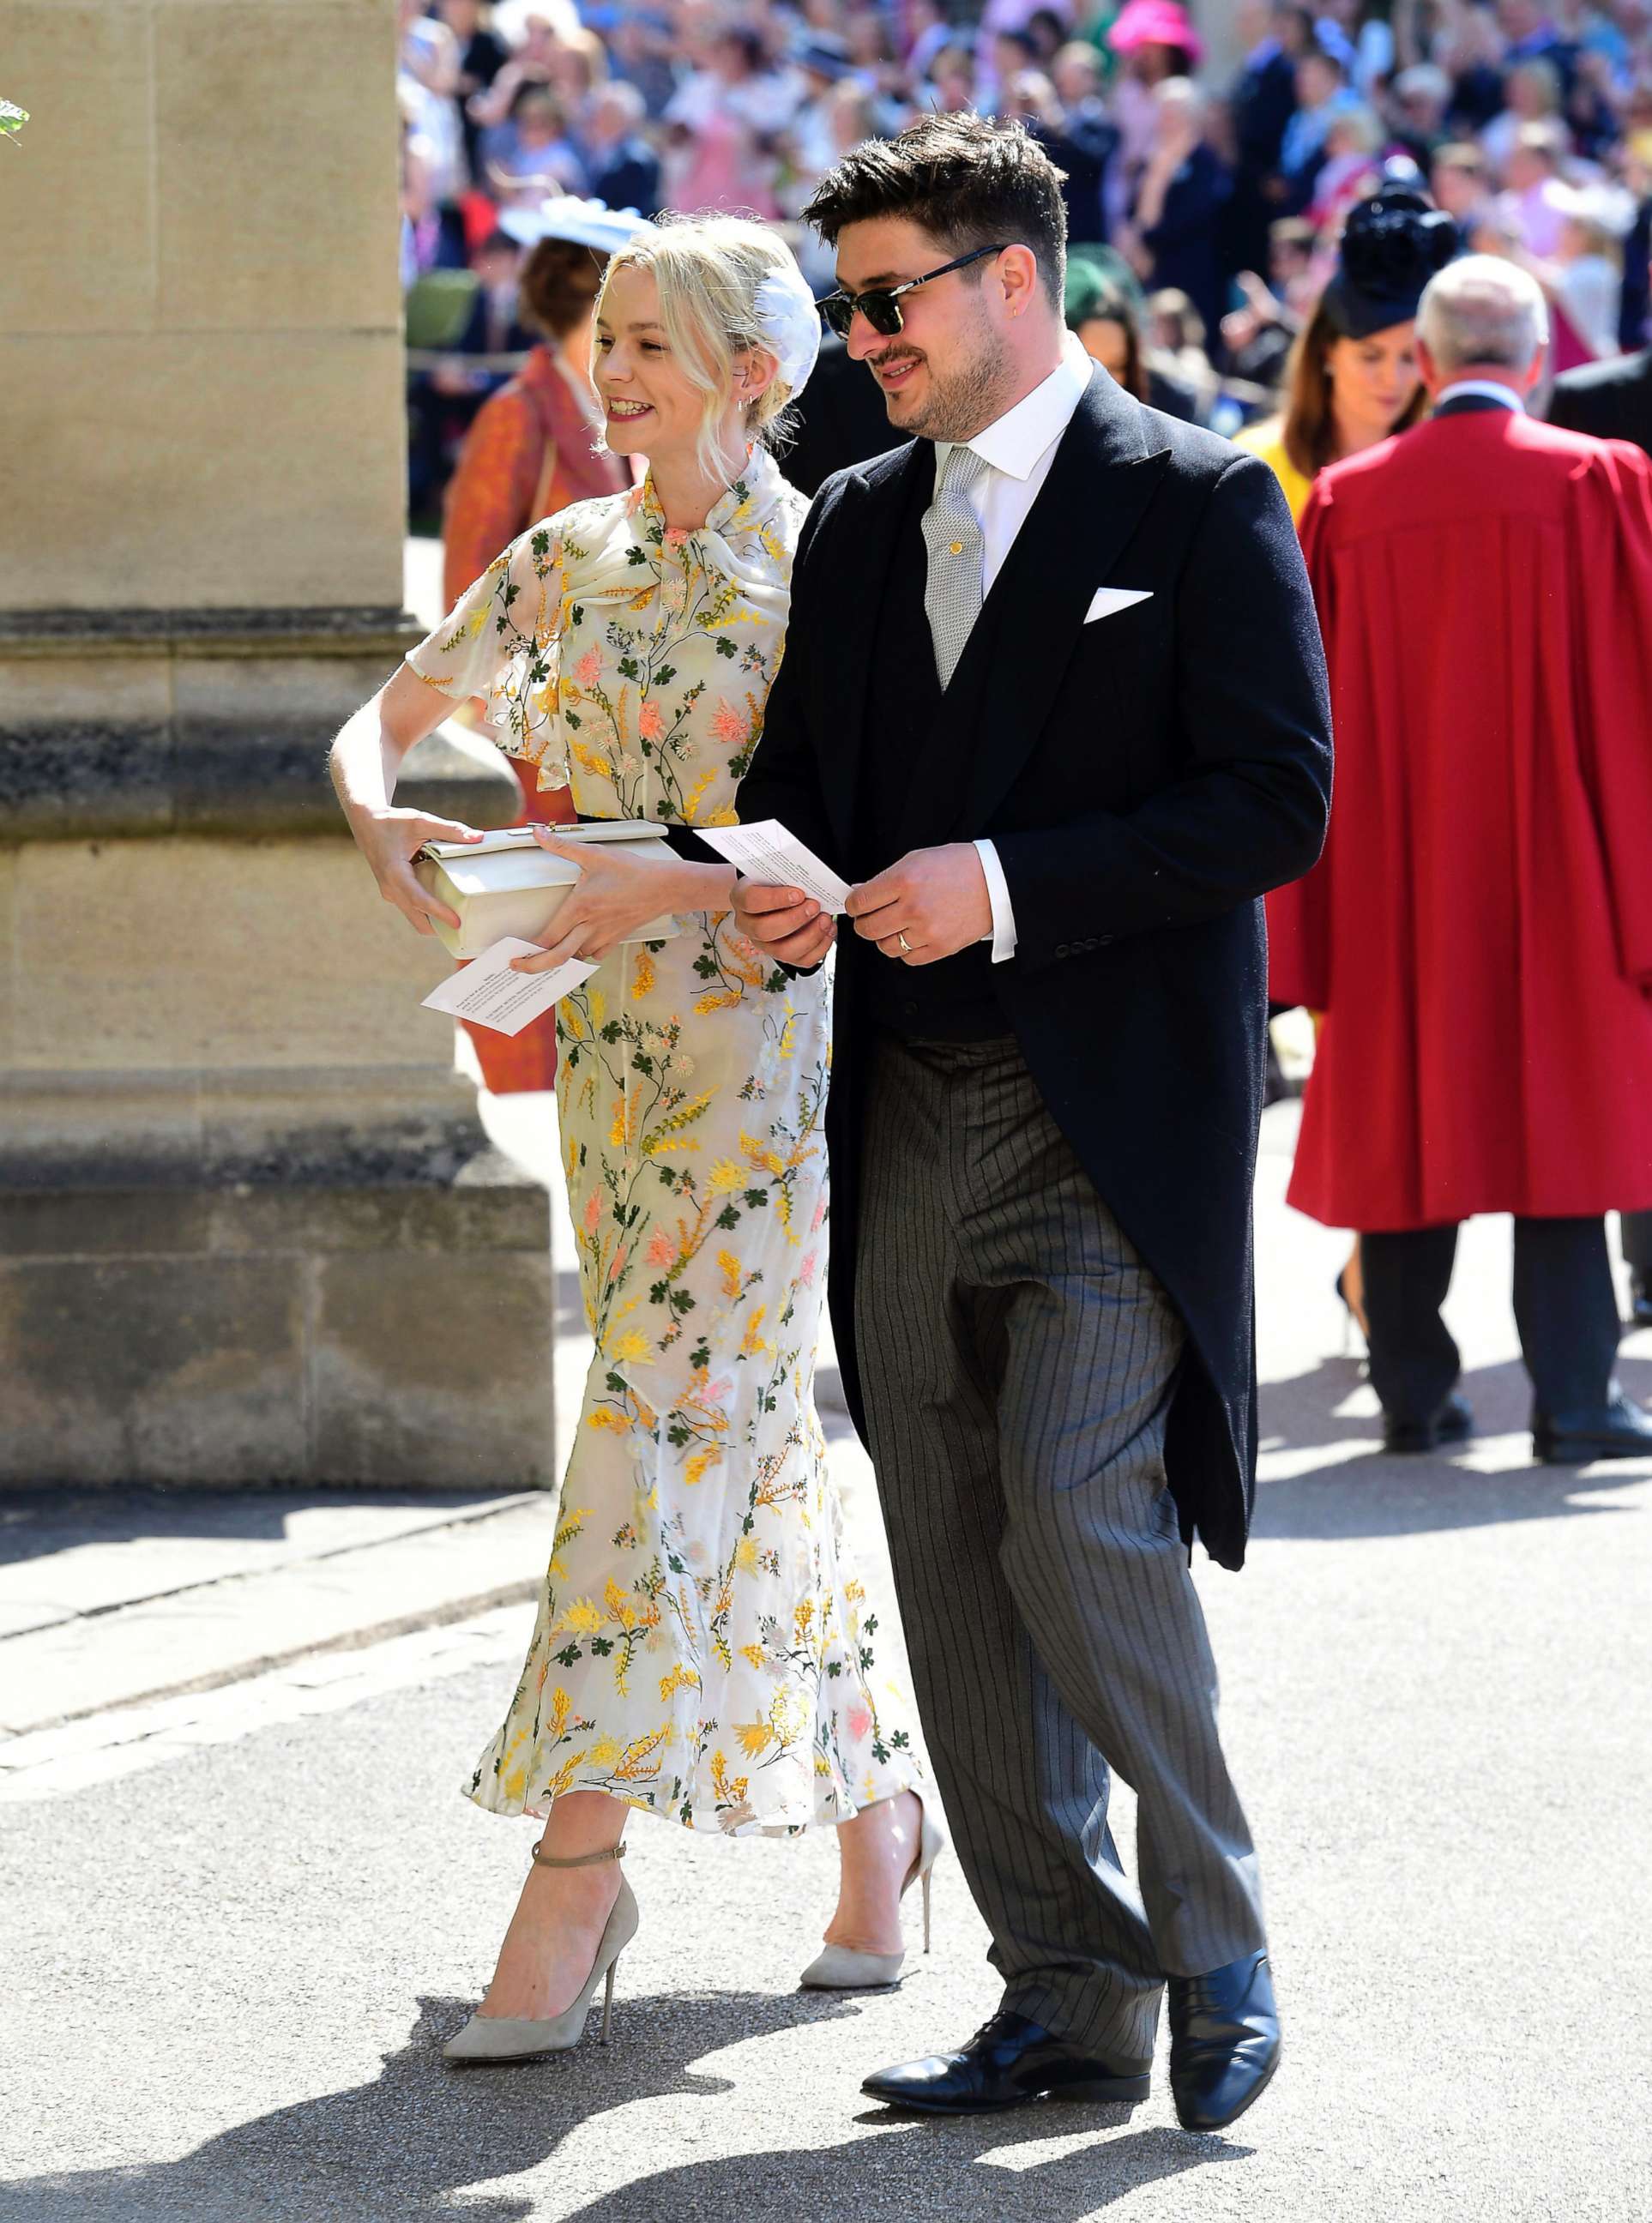 PHOTO: Marcus Mumford and Carey Mulligan arrive for the wedding ceremony of Prince Harry and Meghan Markle at St. George's Chapel in Windsor Castle in Windsor, May 19, 2018. 